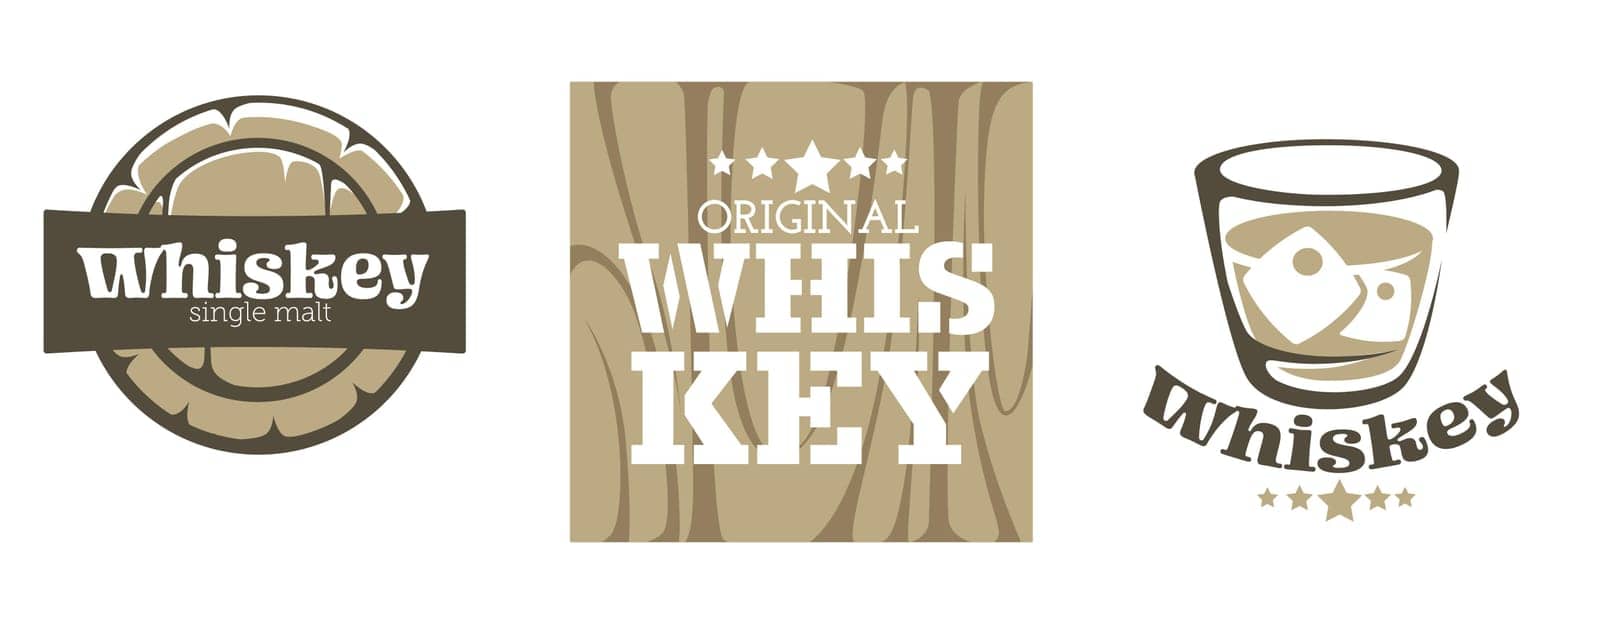 Whiskey original alcoholic beverage brewery house by Sonulkaster